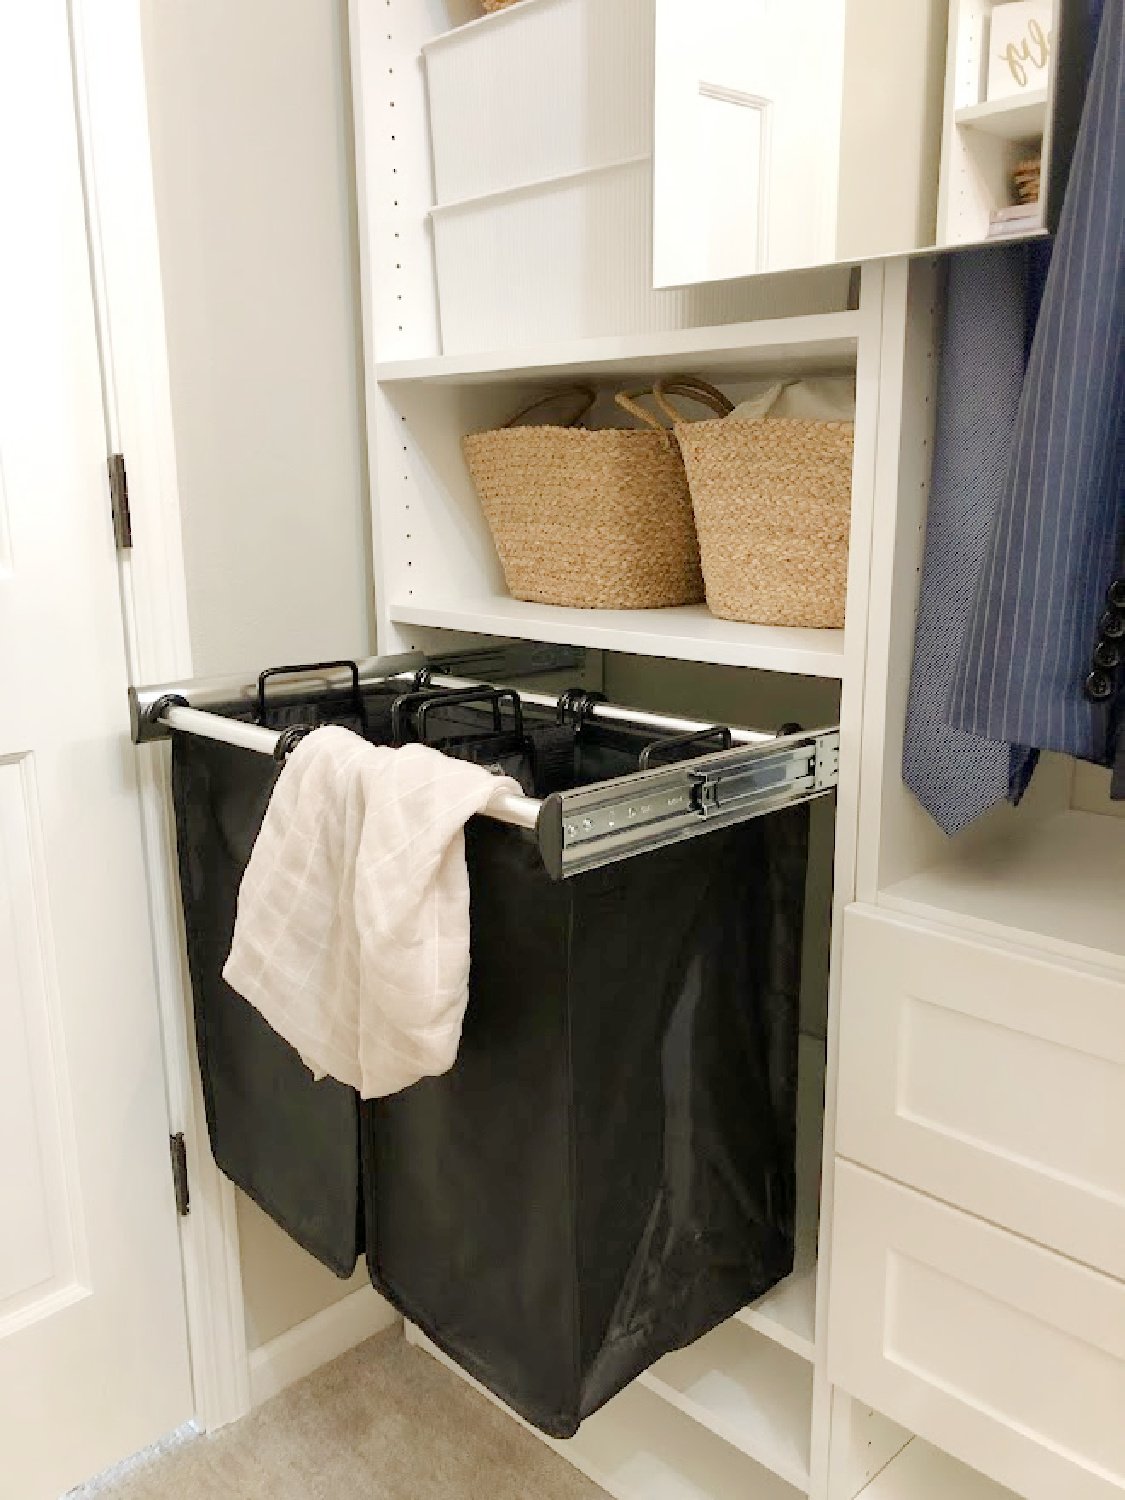 Hamper pullouts from Modular Closets in our new custom designed walk-in closet. Come see the DIY with before/after photos! #laundryhampers #customclosetfeatures #closetdiys